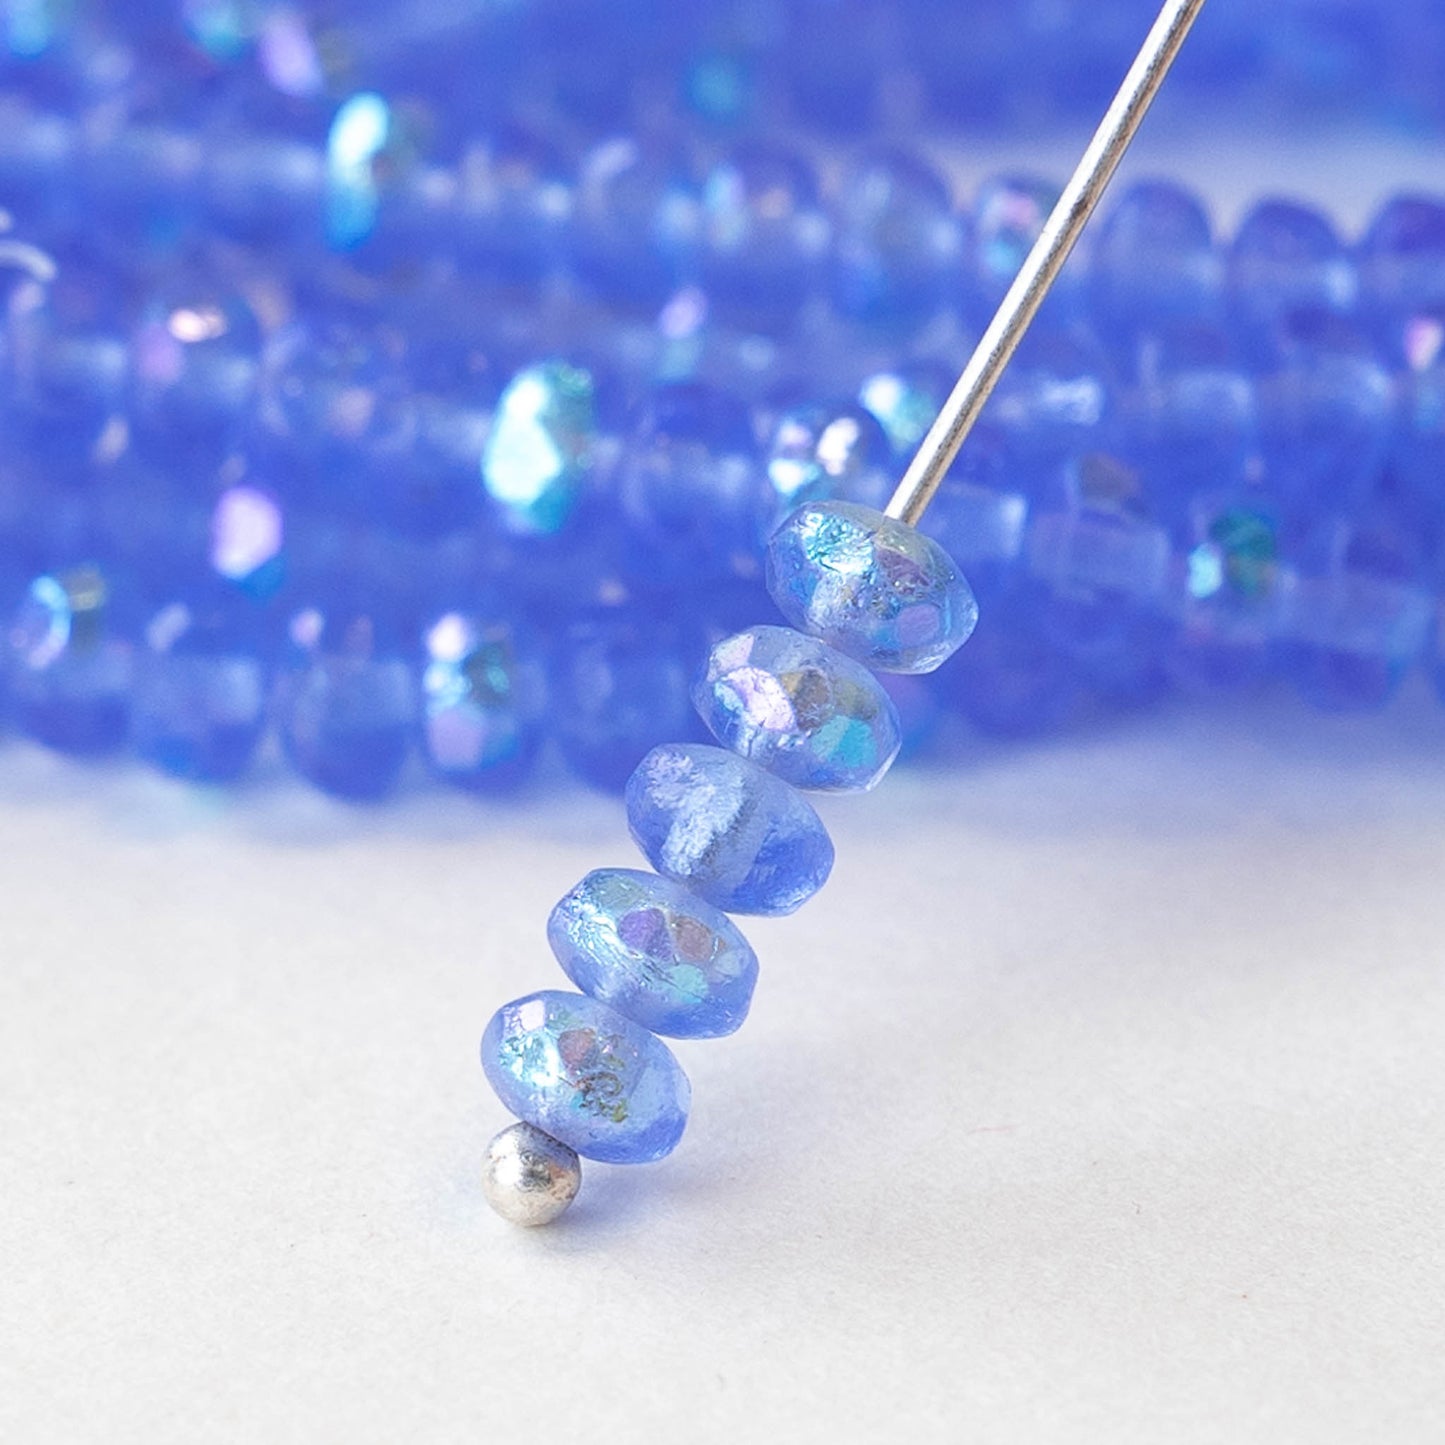 3x4mm Rondelle Beads - Etched Cornflower Blue AB - 10 beads